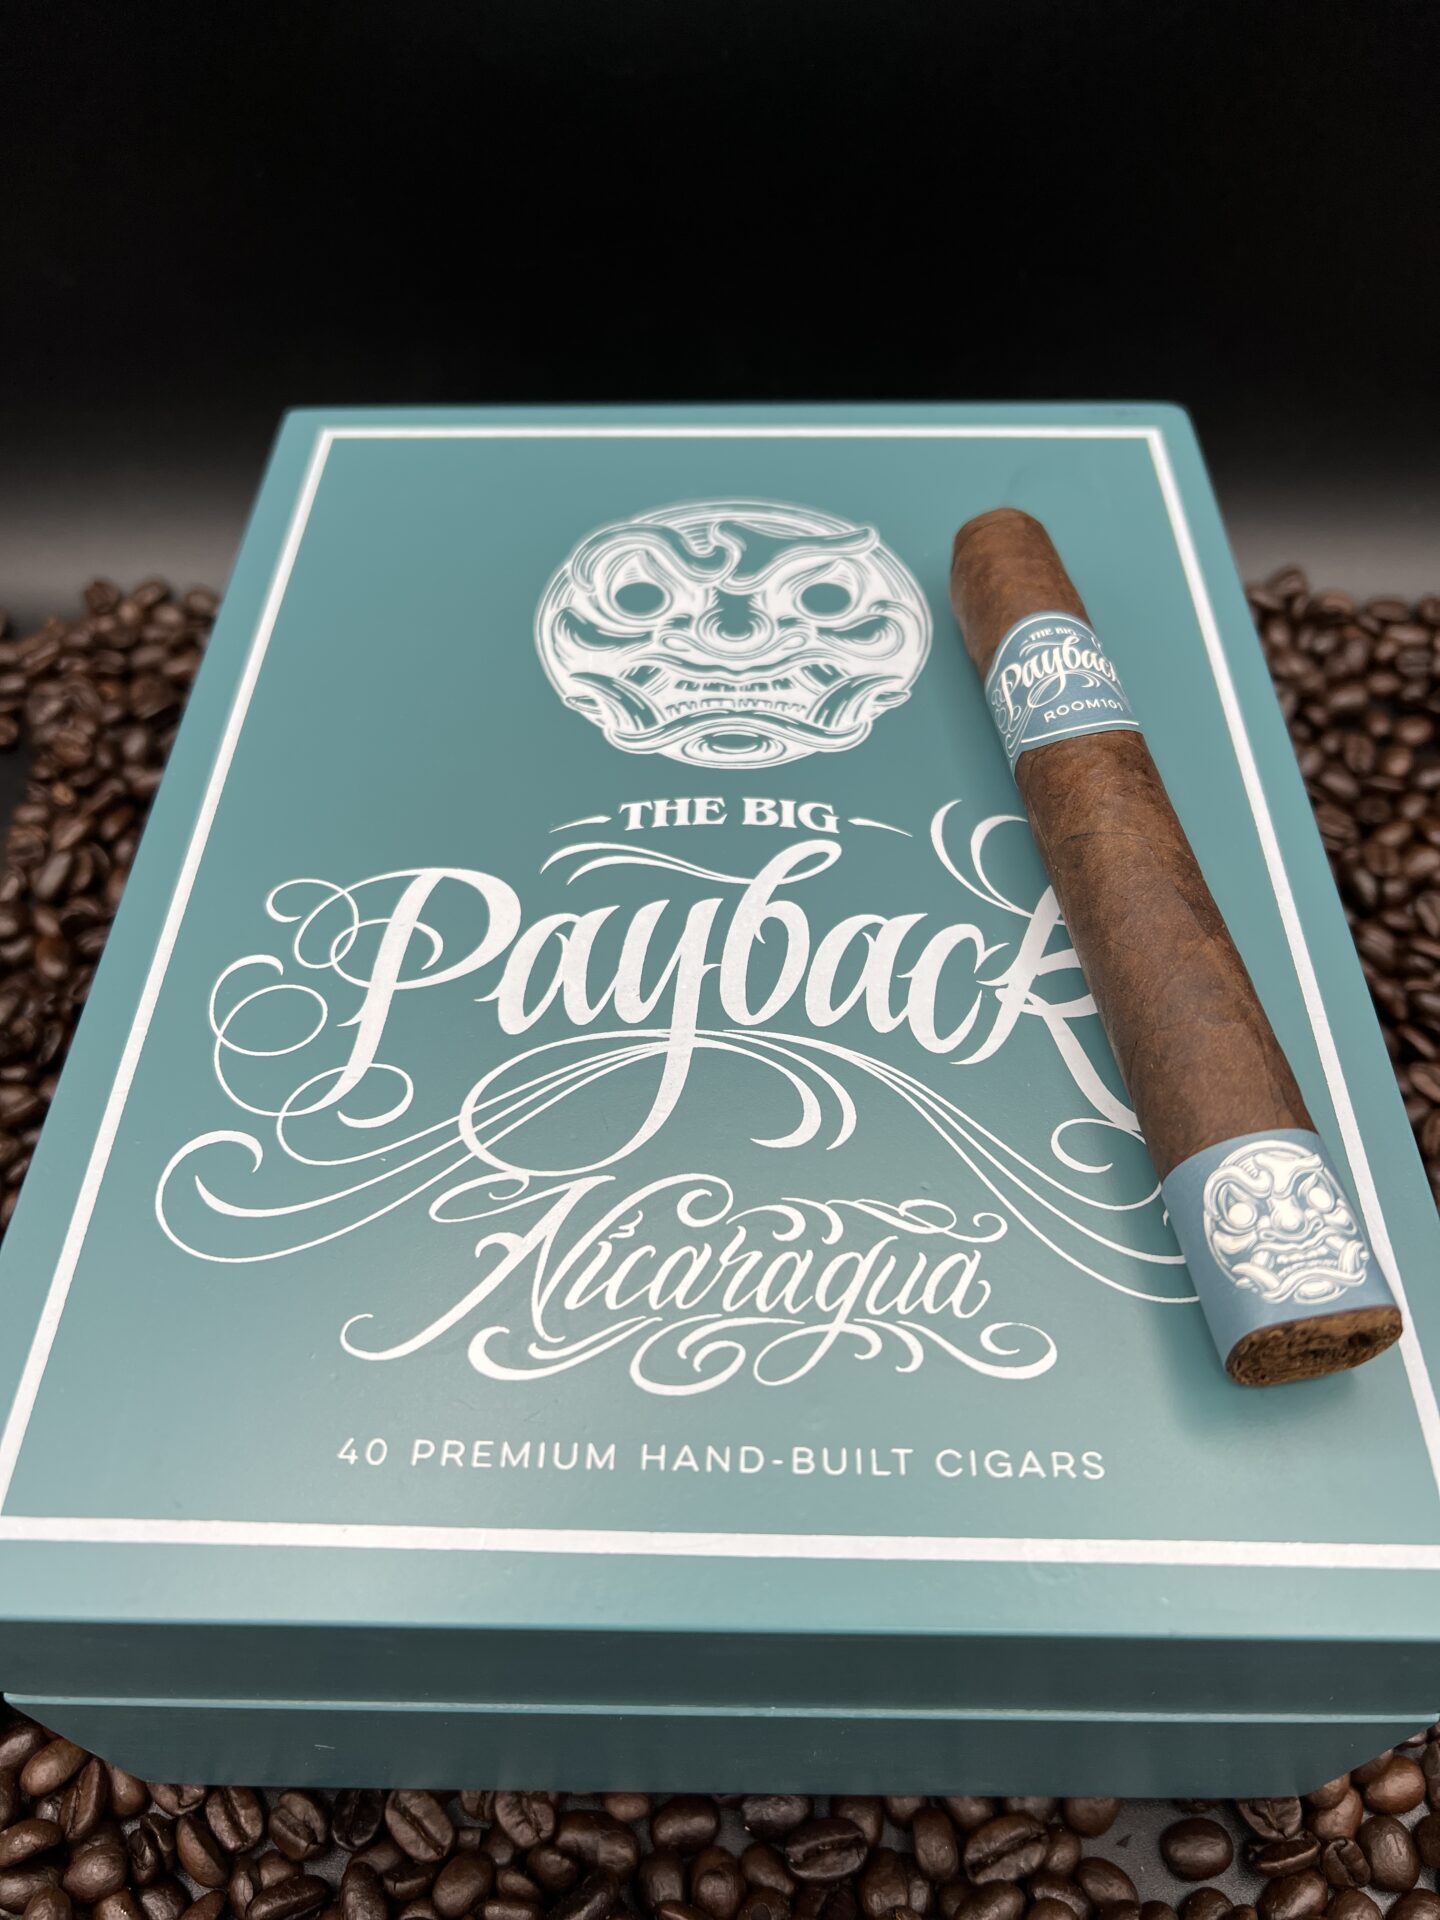 Room 101 - The Big Payback Nicaragua Toro cigars supplied by Sir Louis Cigars